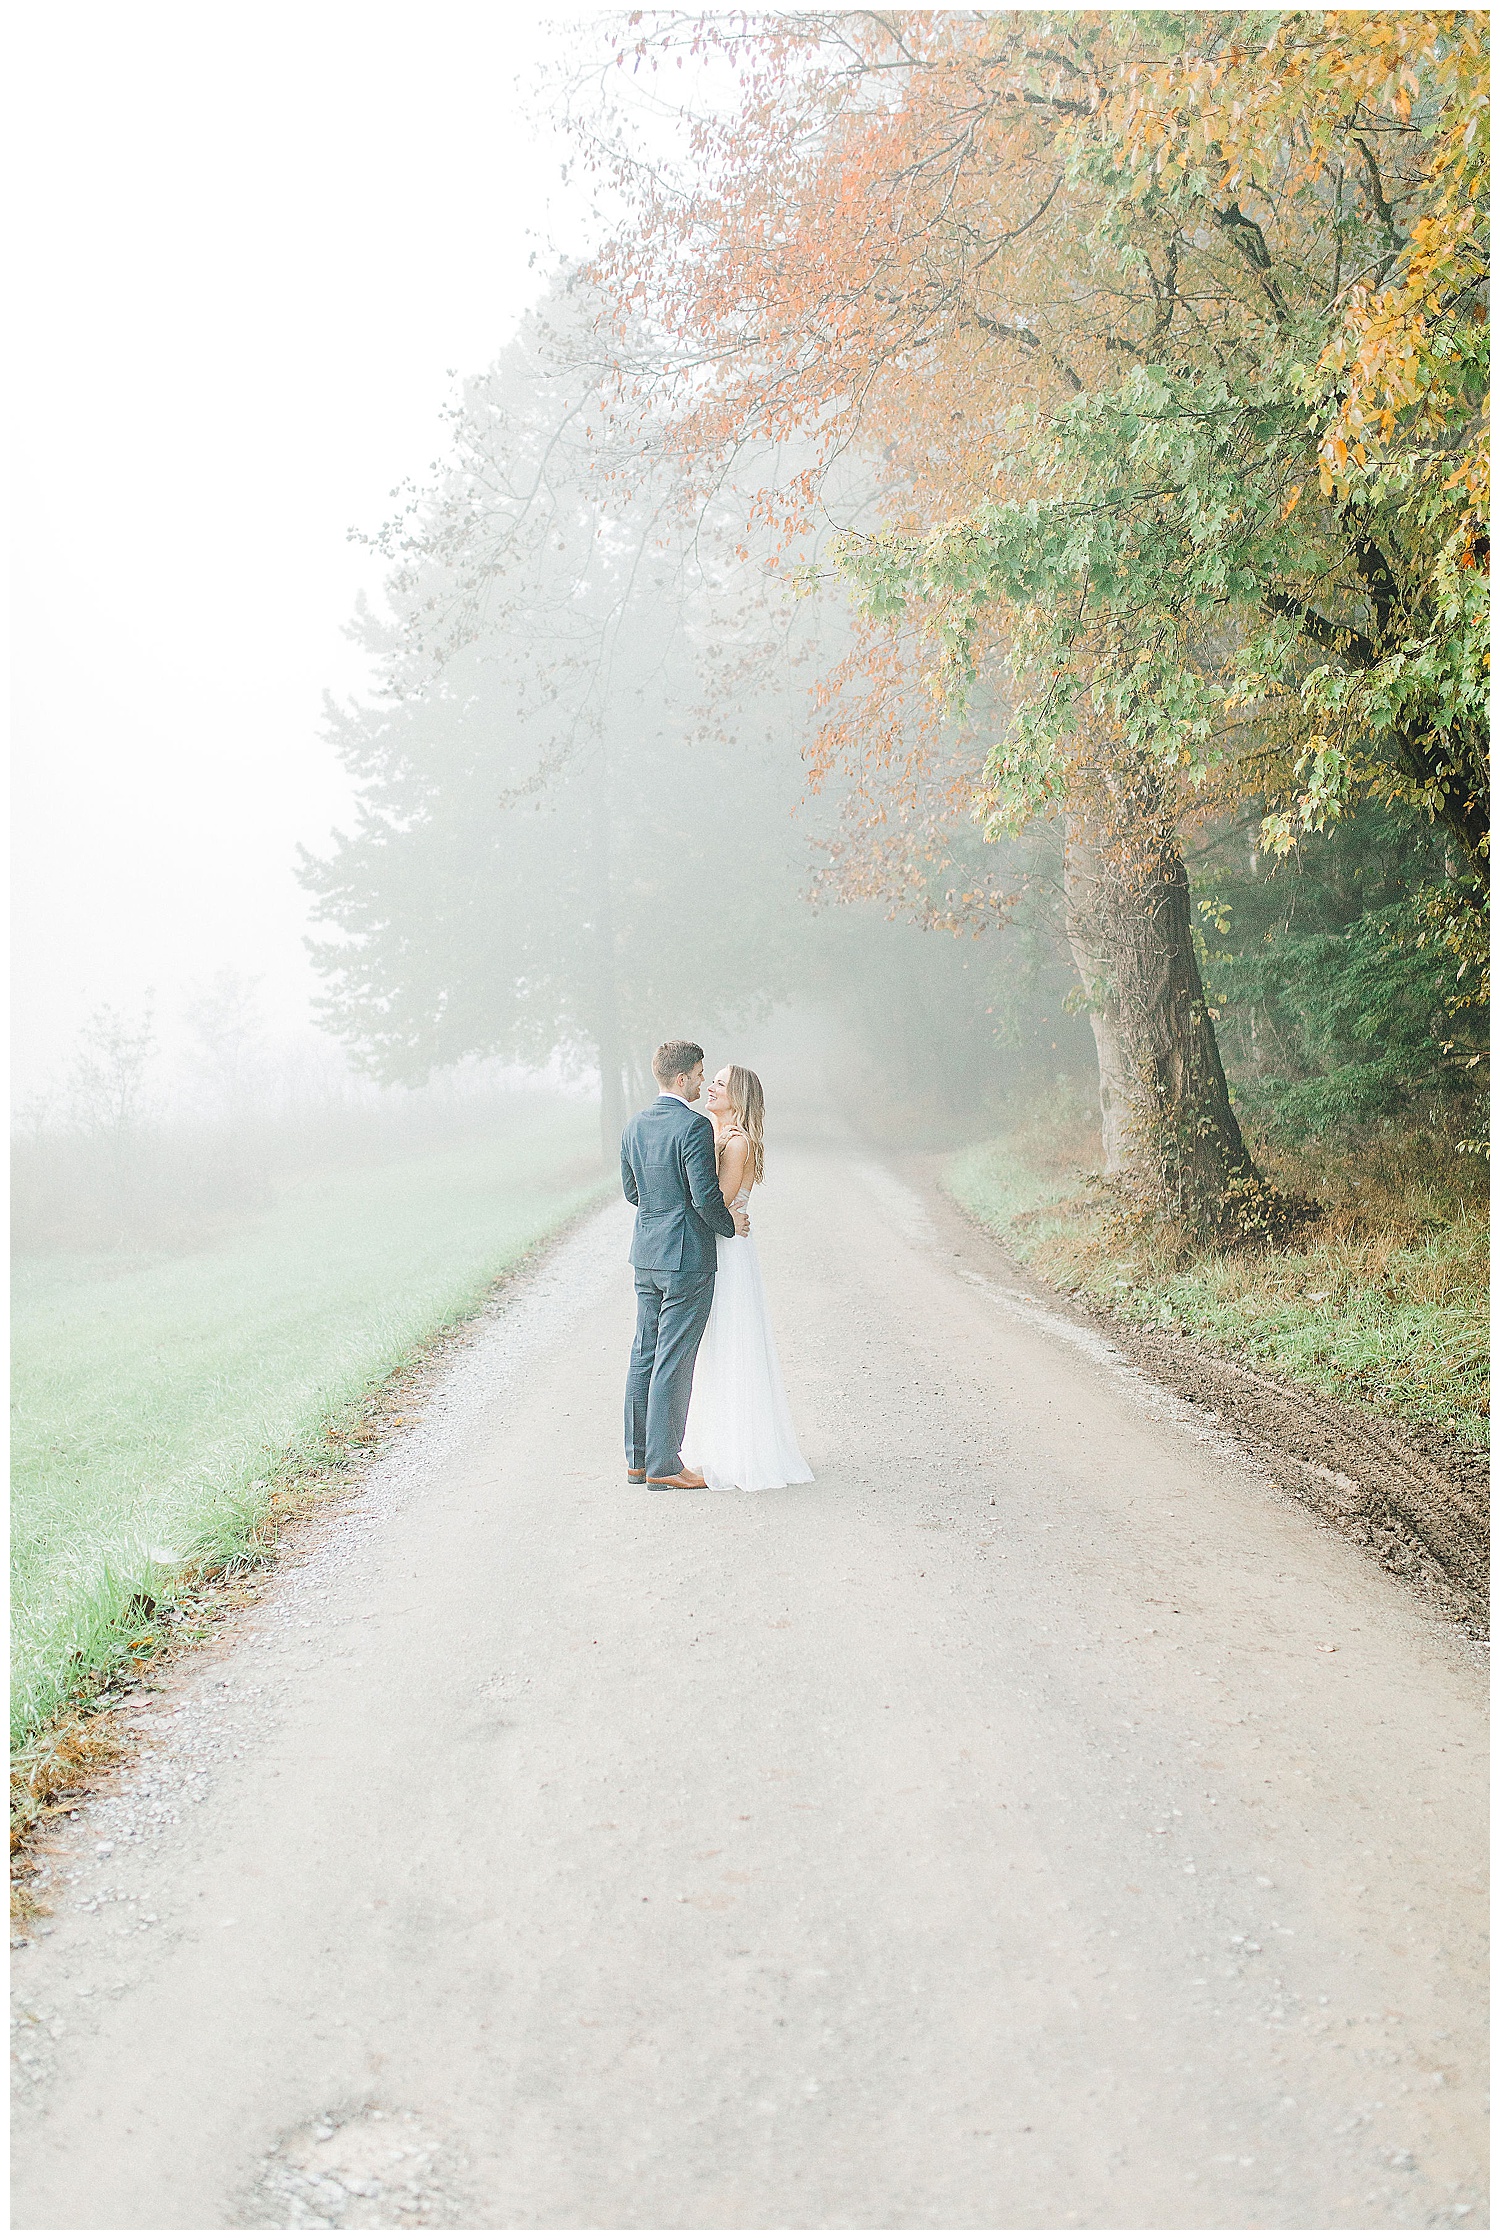 Emma Rose Company recently got to travel all the way to Nashville to photograph the most beautiful post-wedding bride and groom portraits in the Great Smoky Mountains with a gorgeous couple! Nashville wedding inspiration at it's finest._0022.jpg